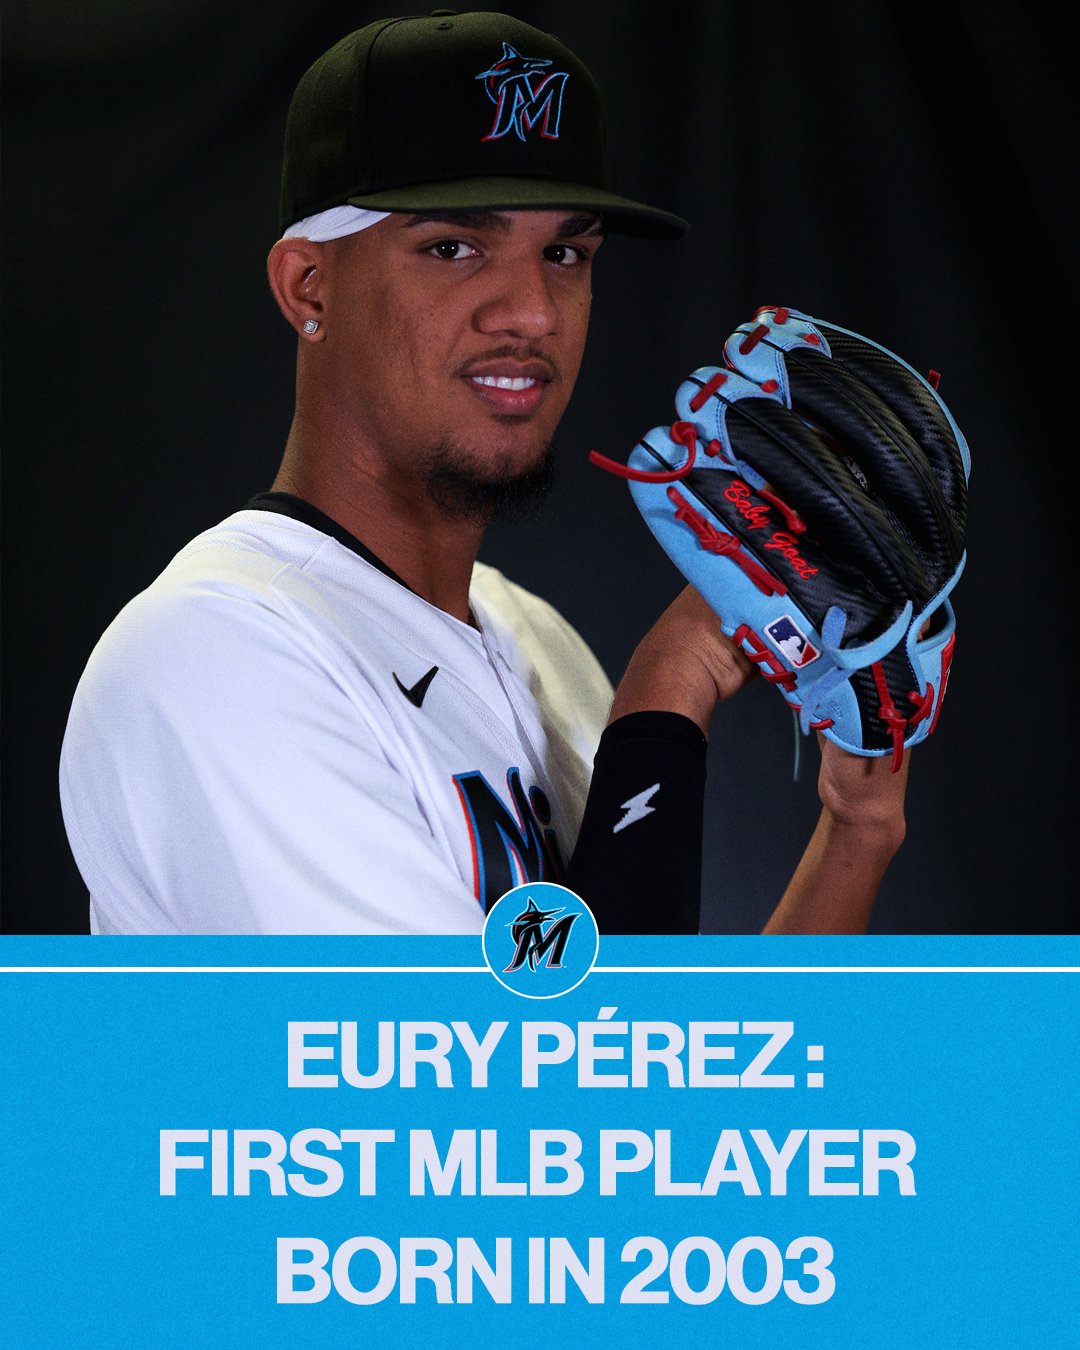 MLB on X: .@Marlins No. 1 prospect Eury Pérez makes his debut tonight! He  will be the first MLB player born in 2003, which happens to be the year the  Marlins won